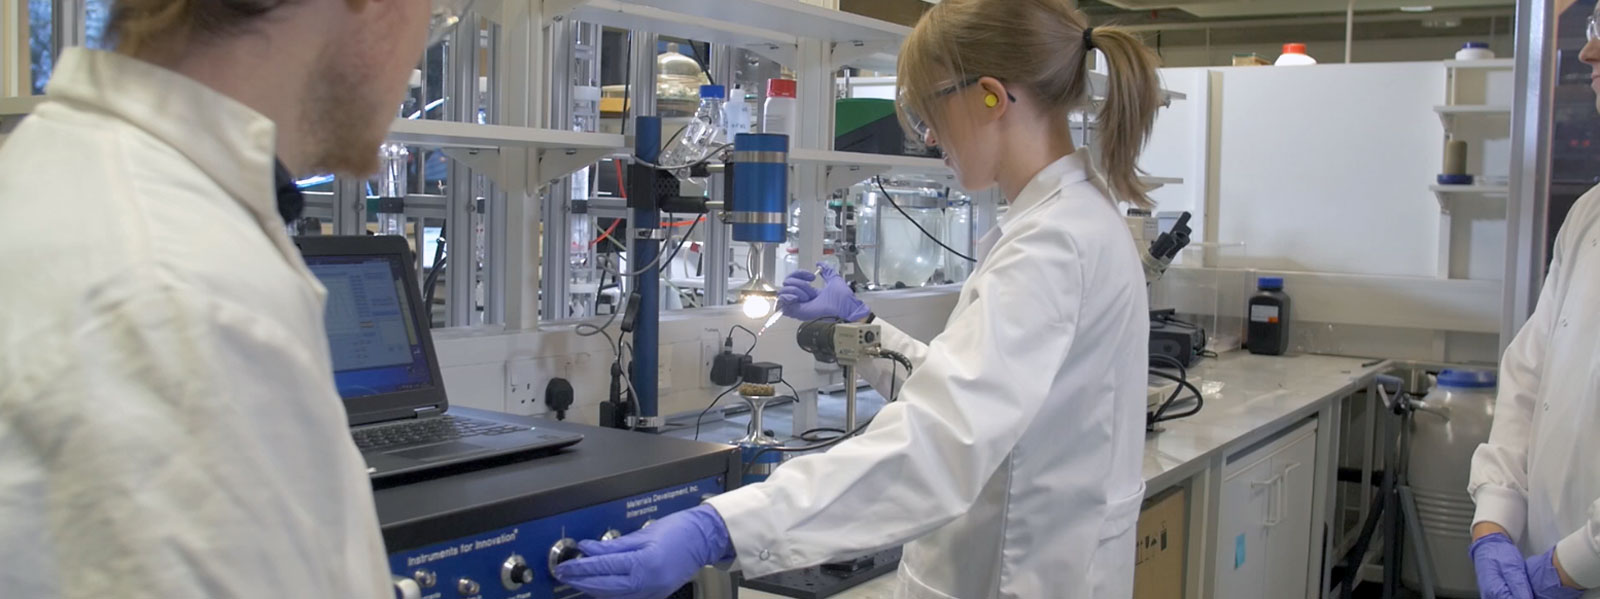 Scientists working in a CMAC laboratory in white lab coats and glasses